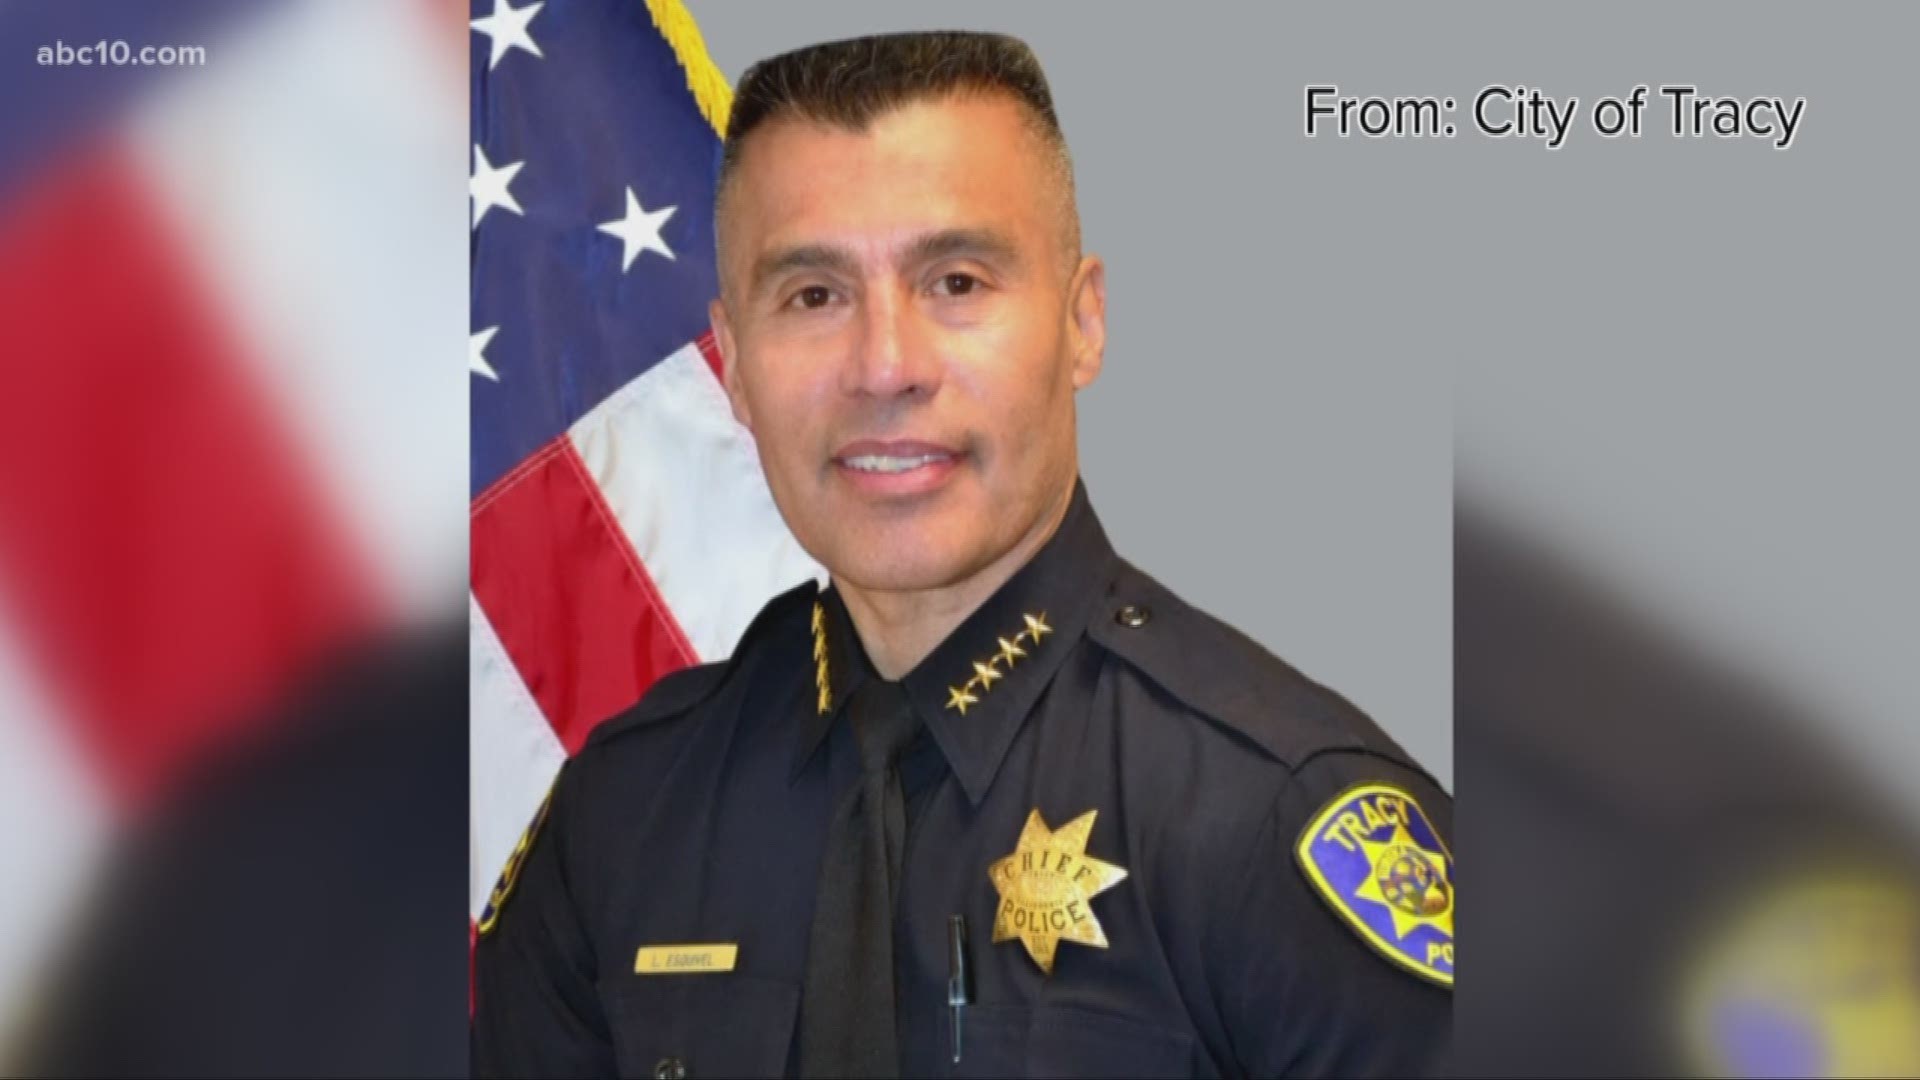 The Tracy Police Chief, Larry Esquivel, has been terminated from his position due to a personnel matter, according to the City of Tracy. 